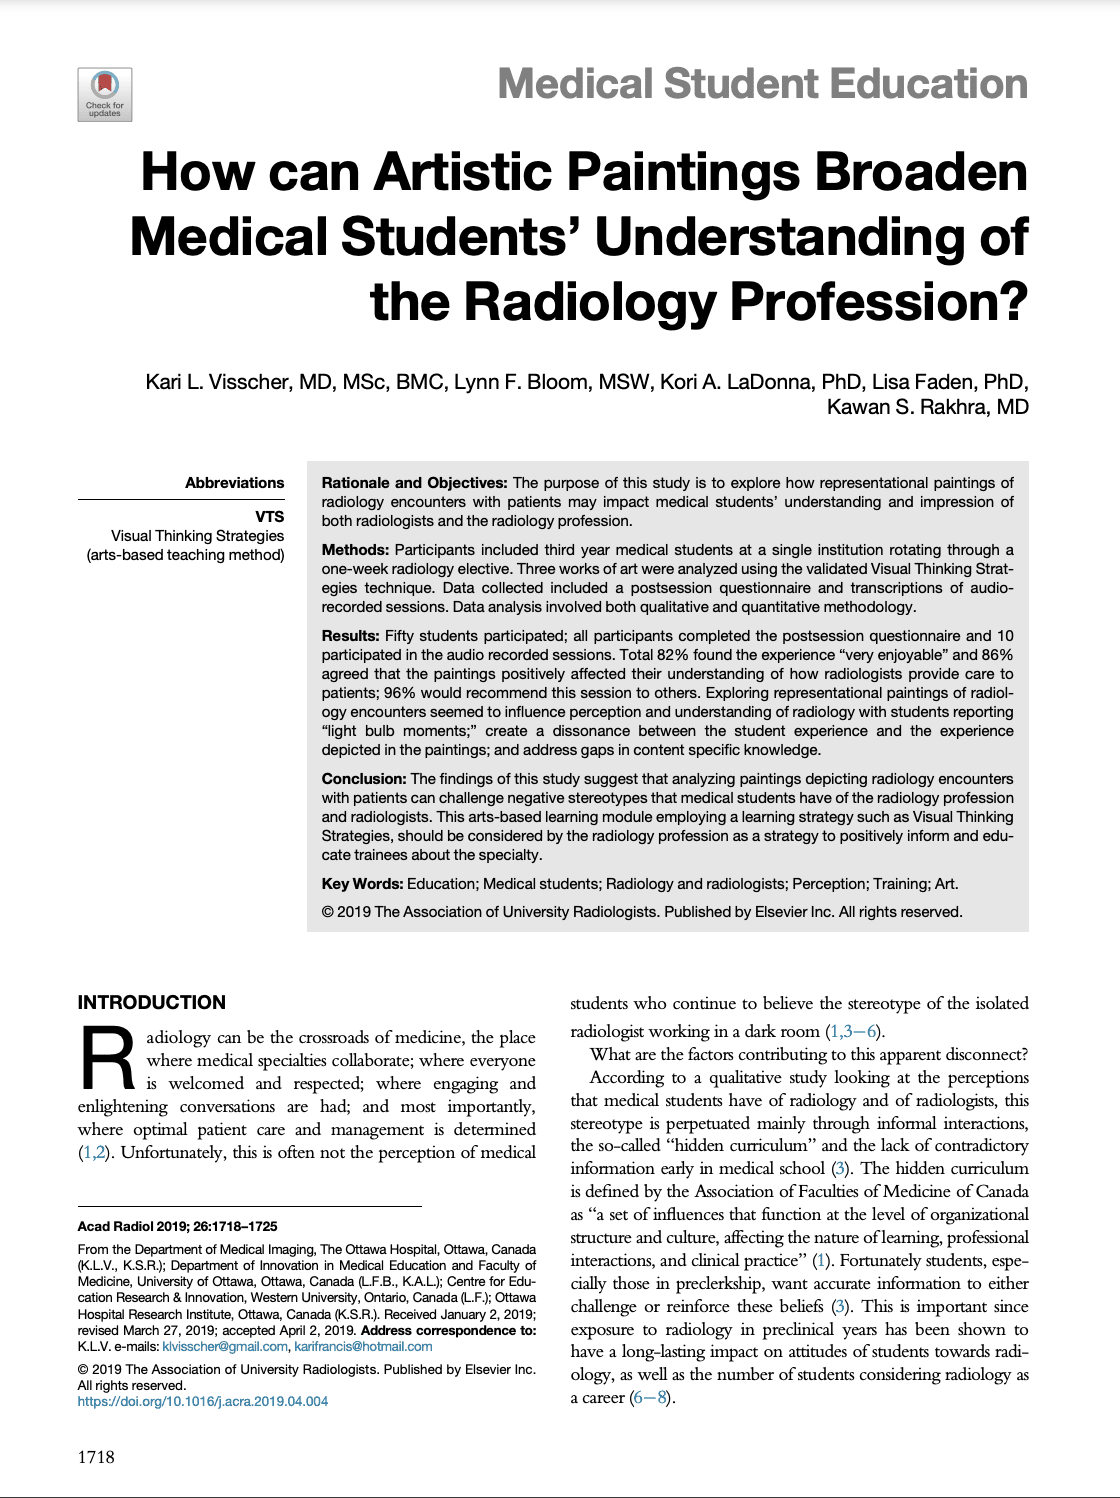 A paper with an article about medical students